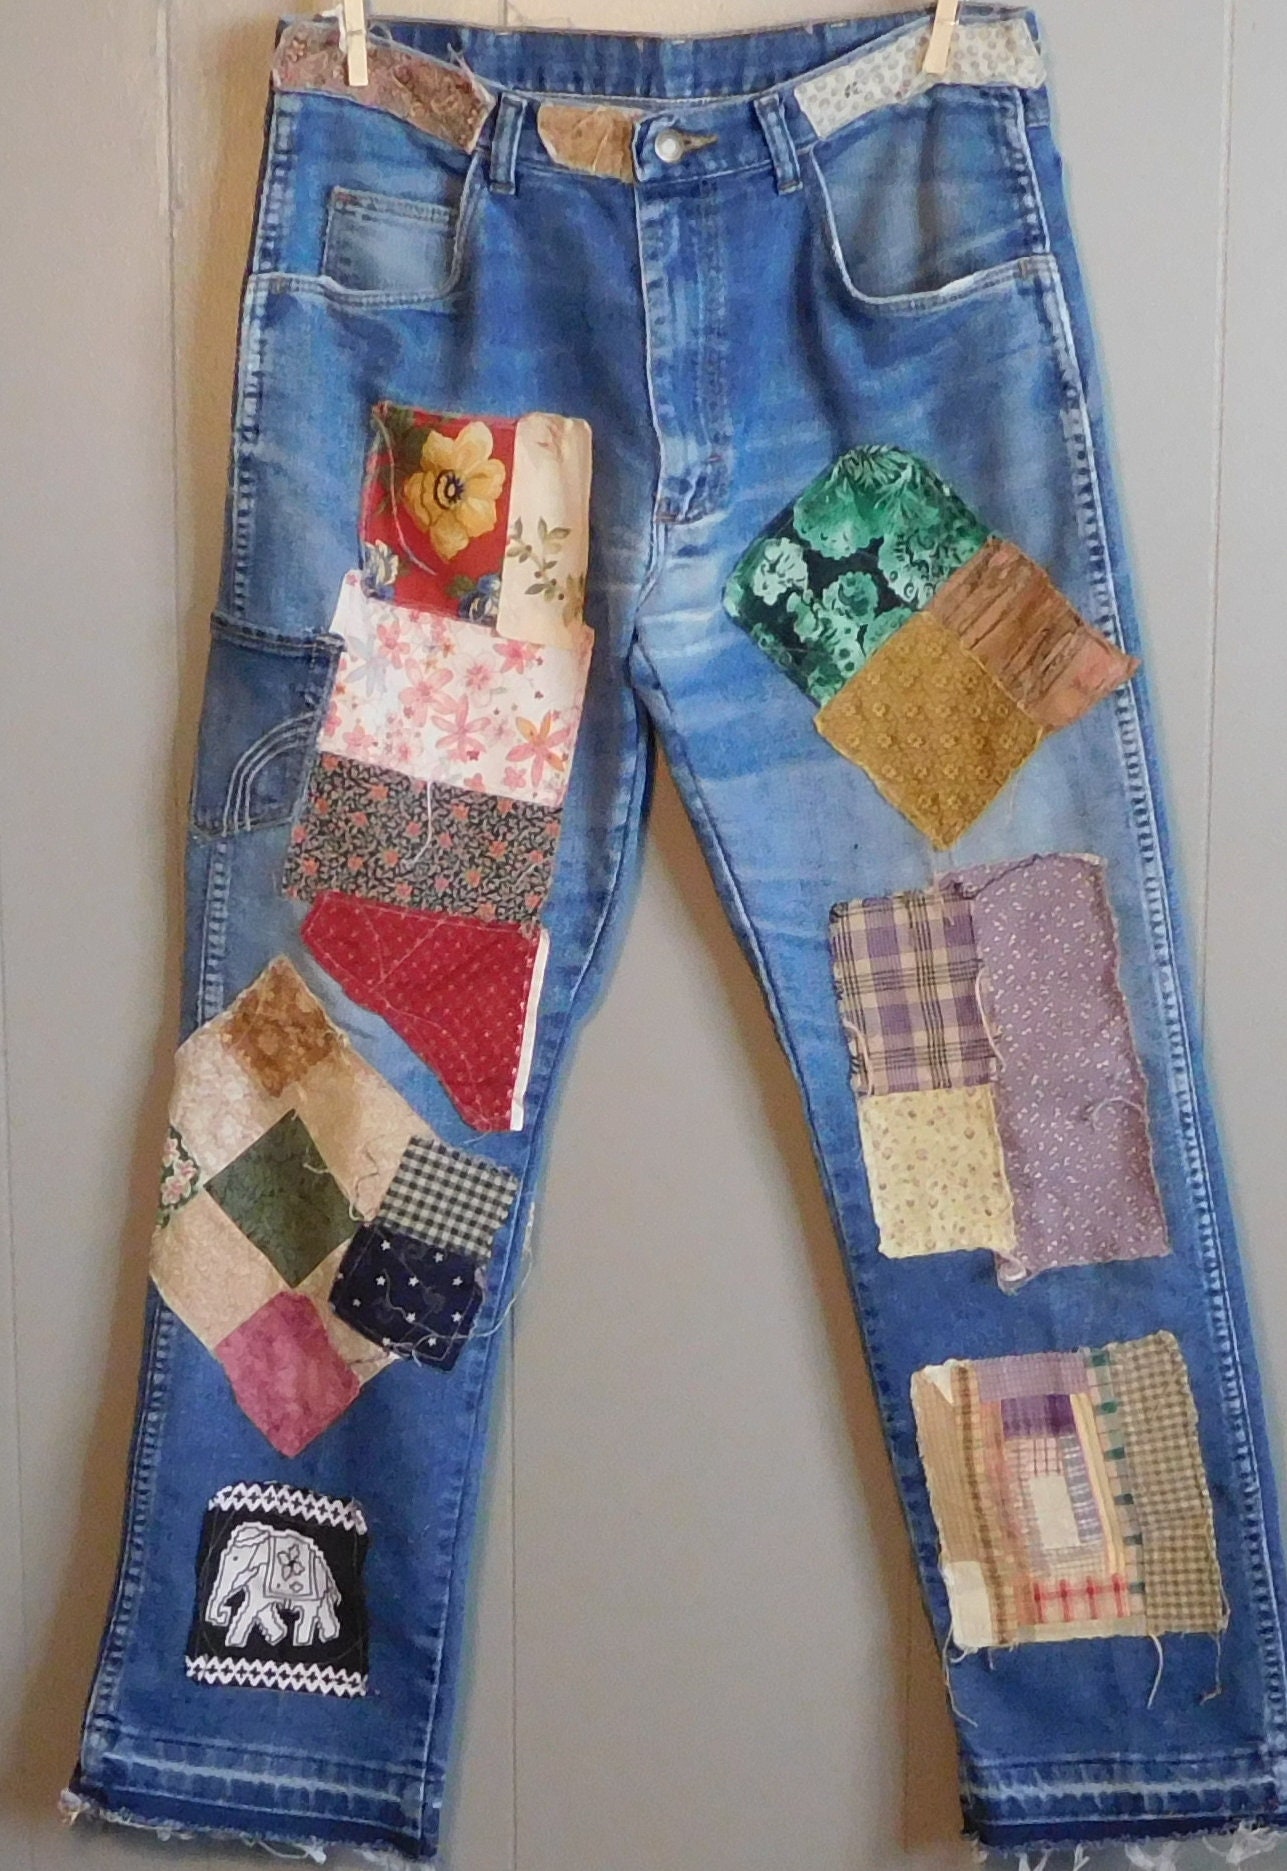 LandofBridget Patchwork Jeans Mens Patched Denim with Patches Boho Hippie Patch Distressed 33x30 Patched Front Back Grunge Hippie Boho Bohemian Handmade